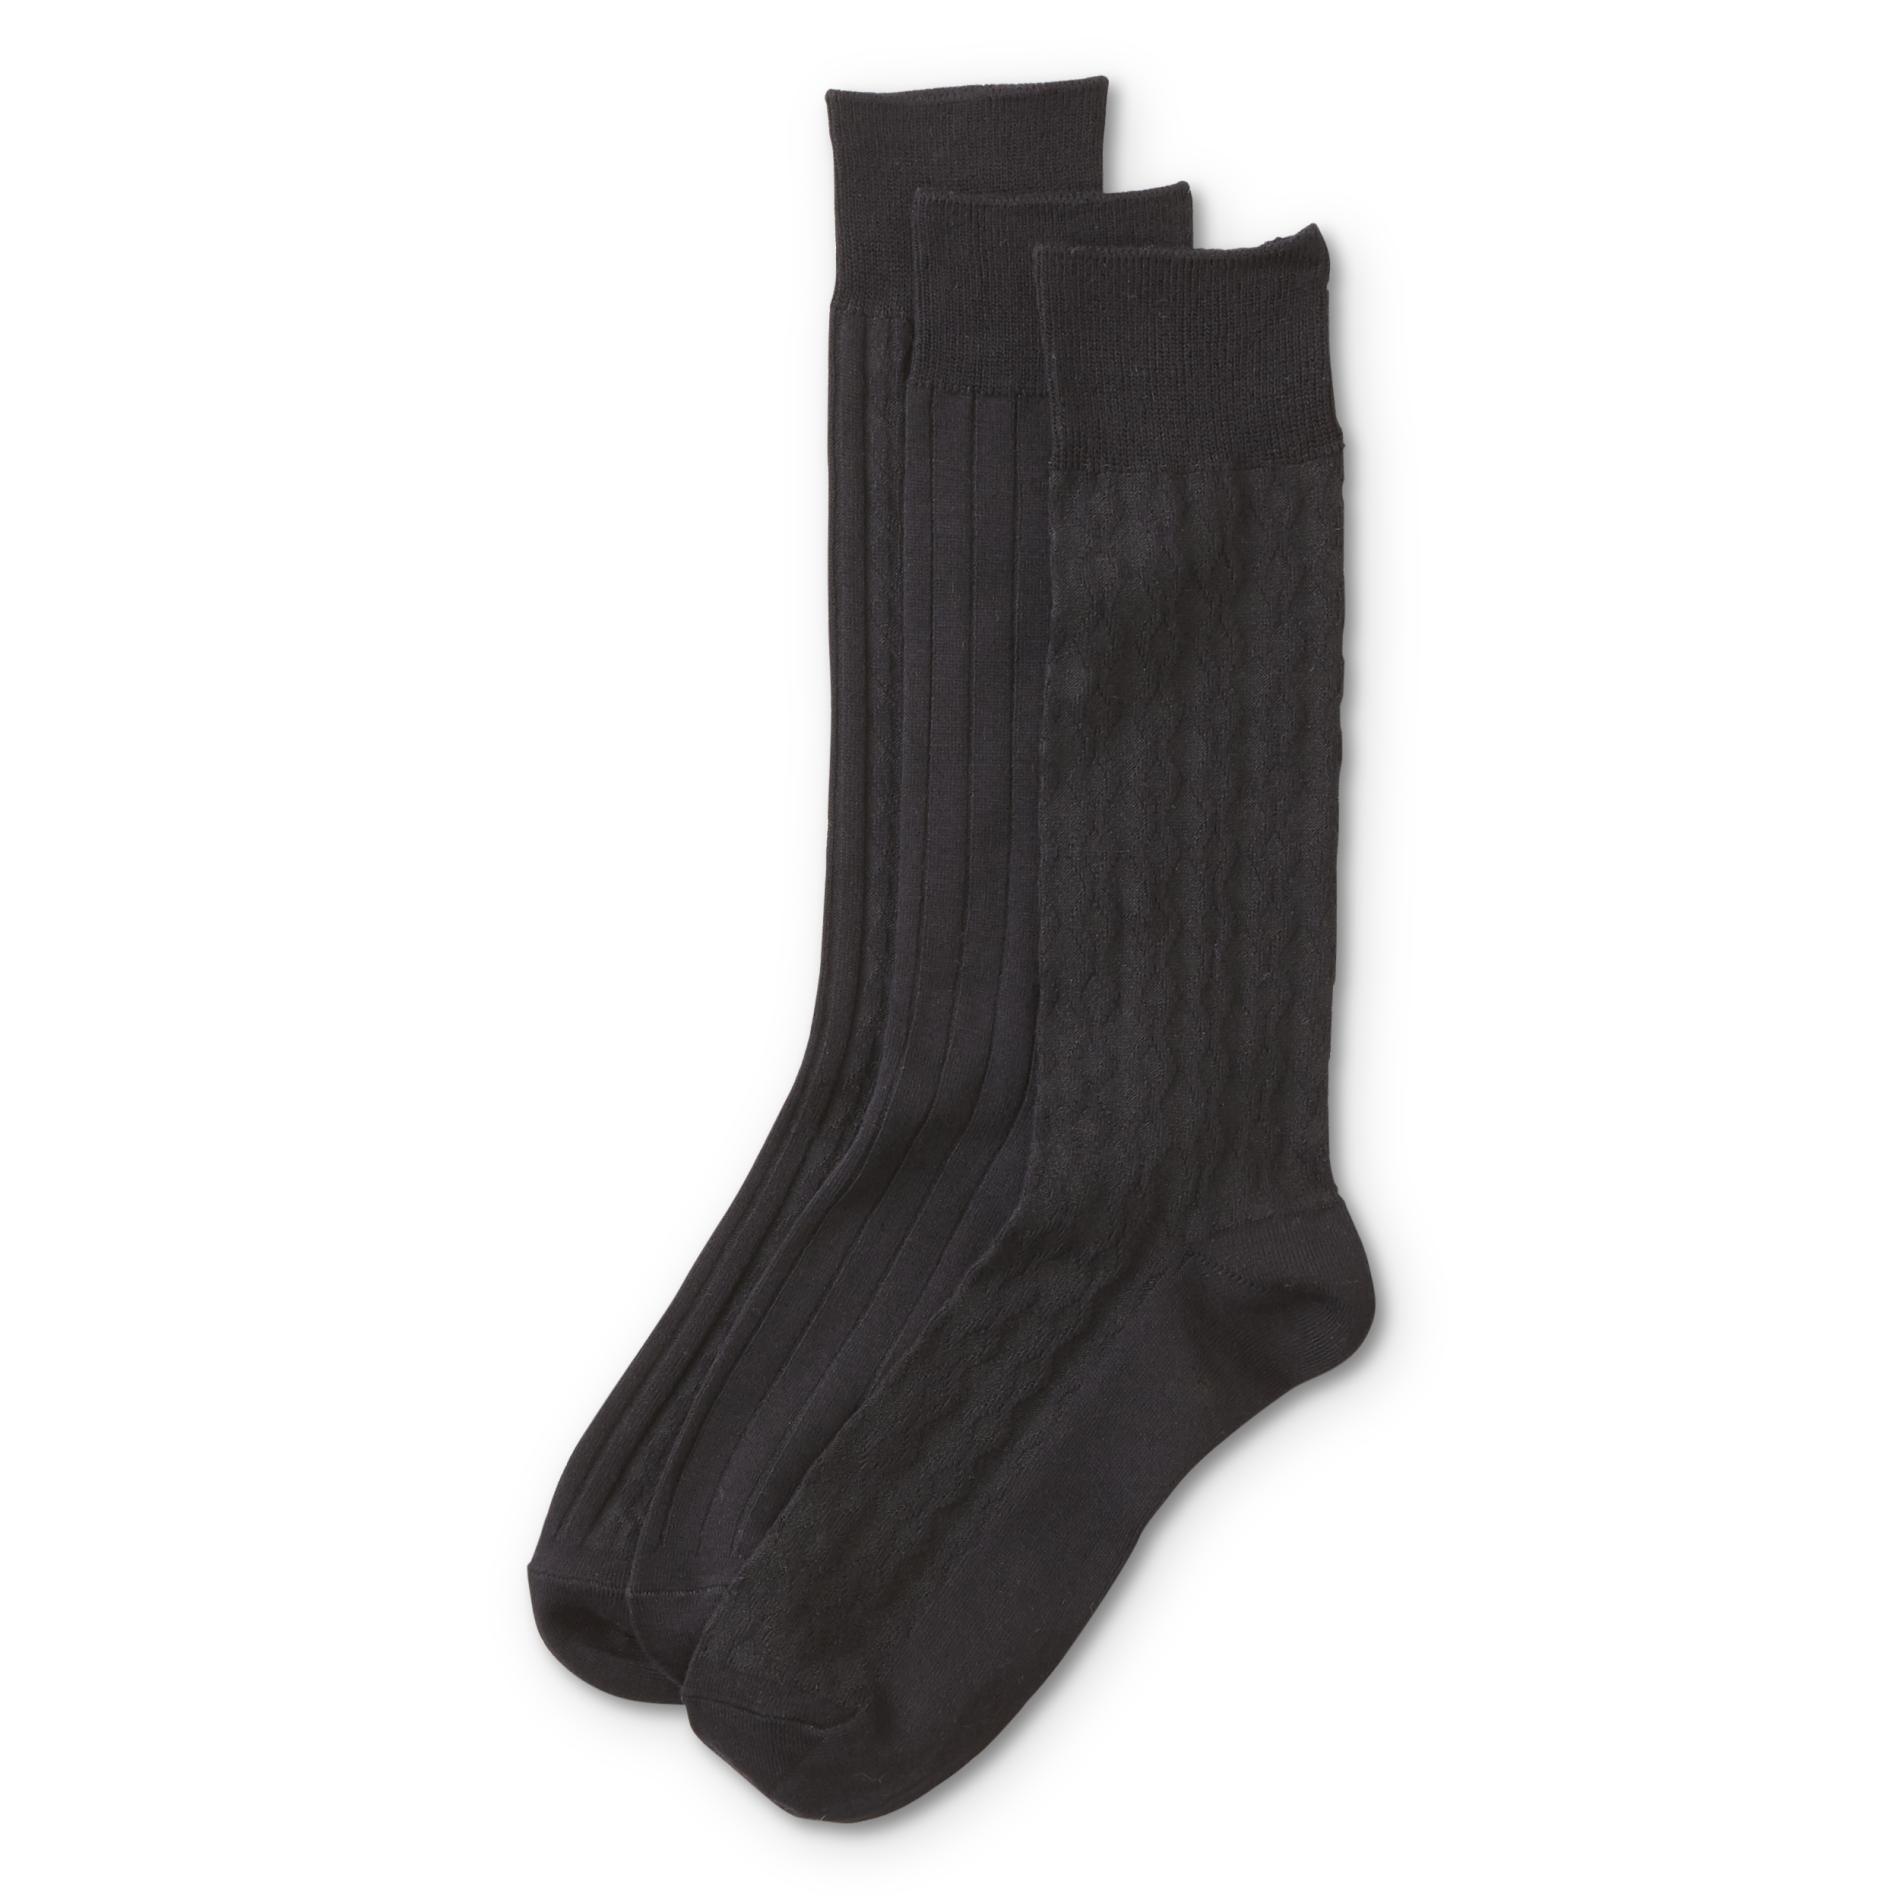 Structure Men's 3-Pairs Dress Socks - Diamond, Striped & Cable